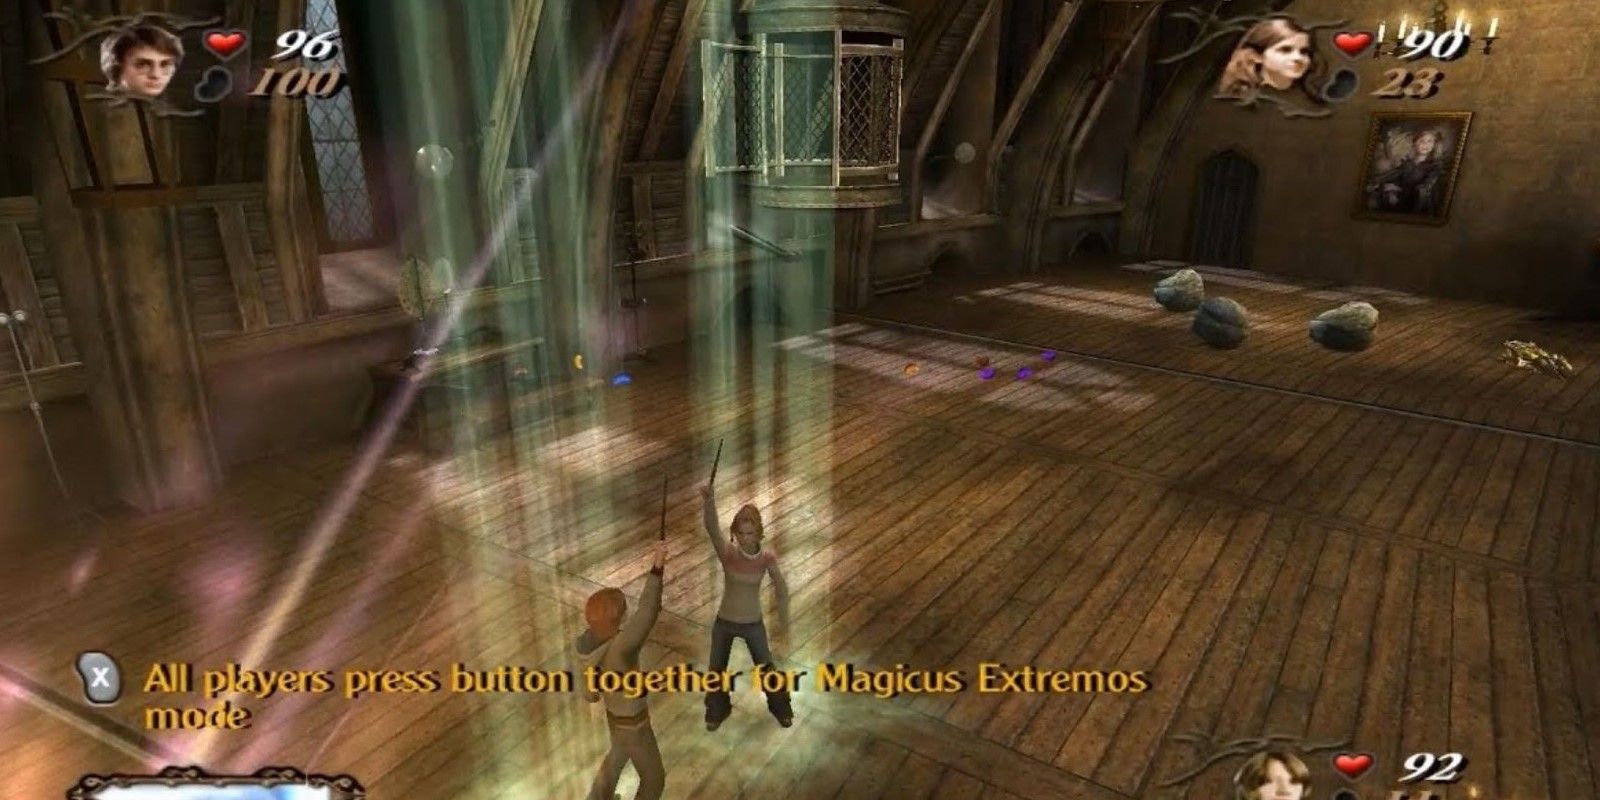 Showing Magicus Extremos mode in Harry Potter and the Goblet of Fire game.